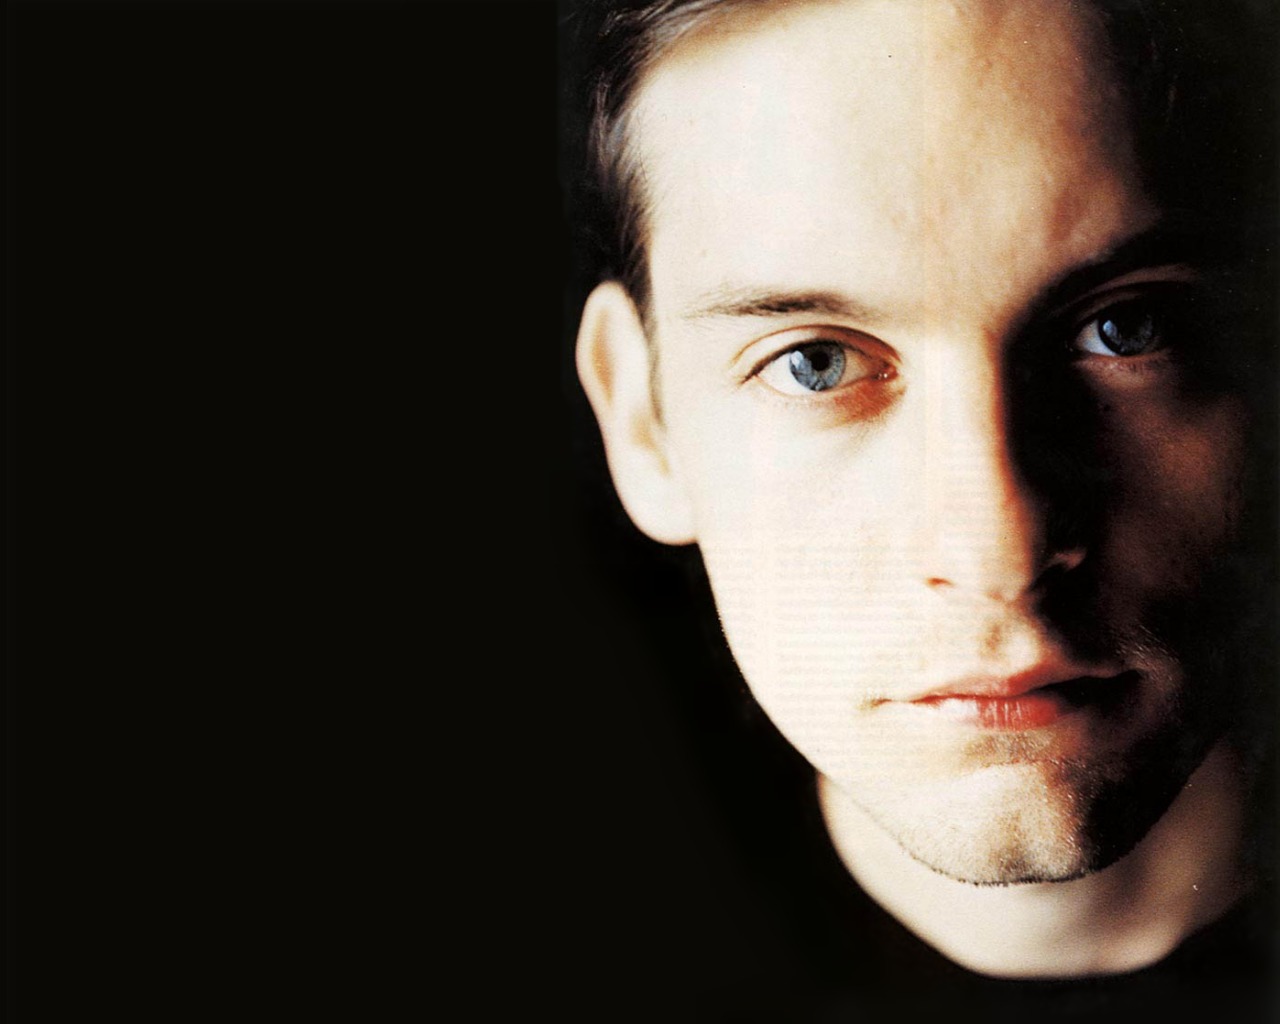 Tobey_Maguire_07_1280x1024.jpg